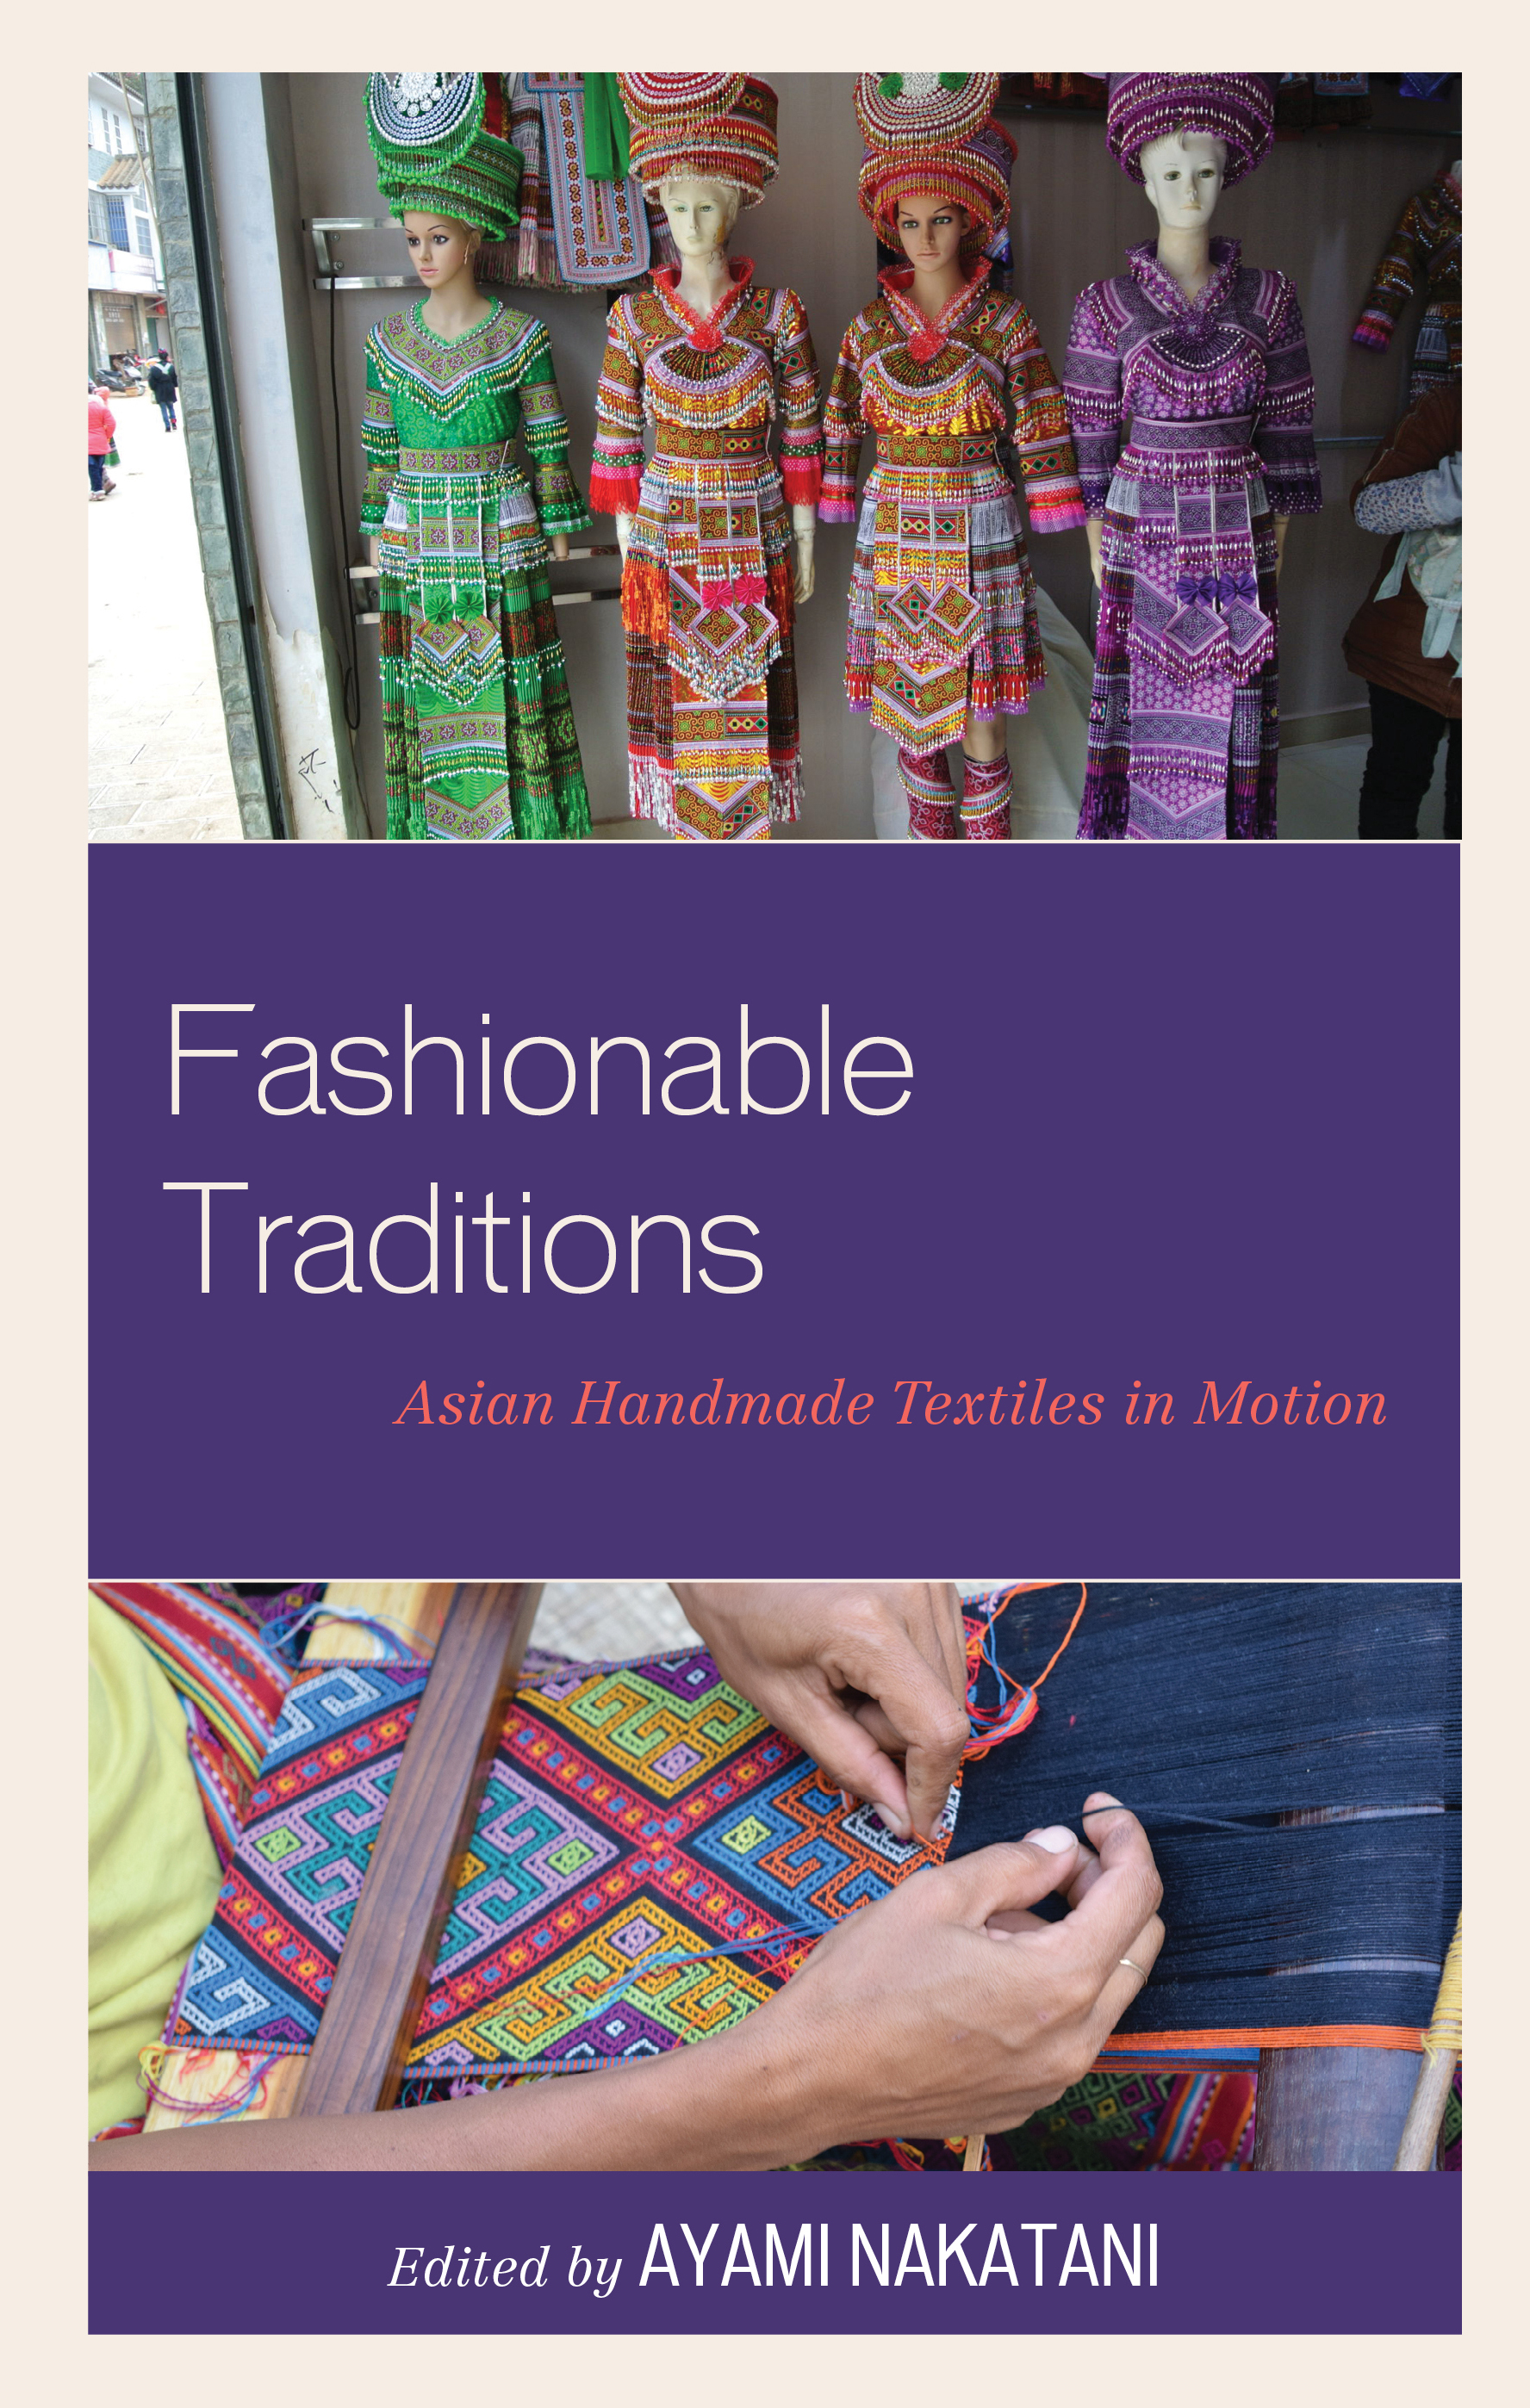 Fashionable Traditions: Asian Handmade Textiles in Motion